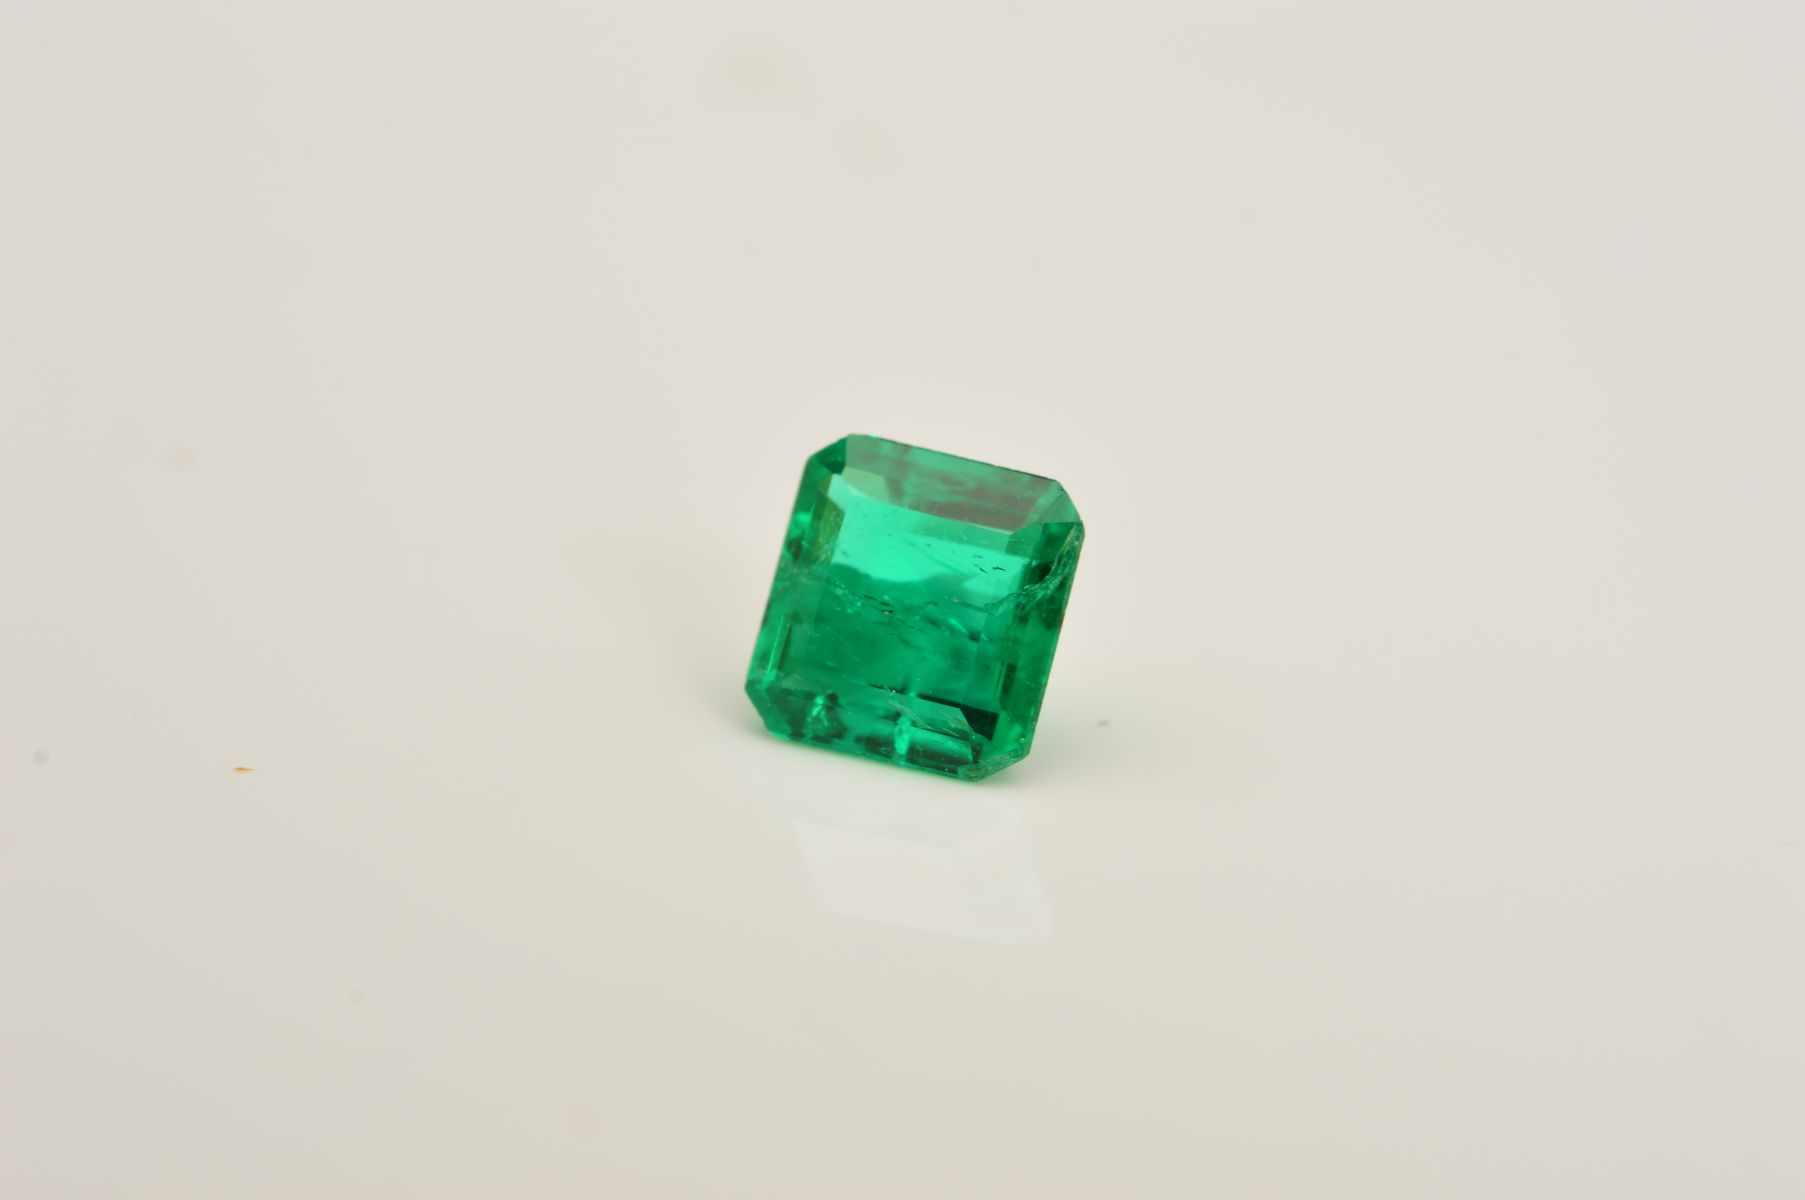 ONE SQUARE MIX CUT EMERALD, measuring approximately 5.0mm x 5.3mm, weight approximately 0.50ct